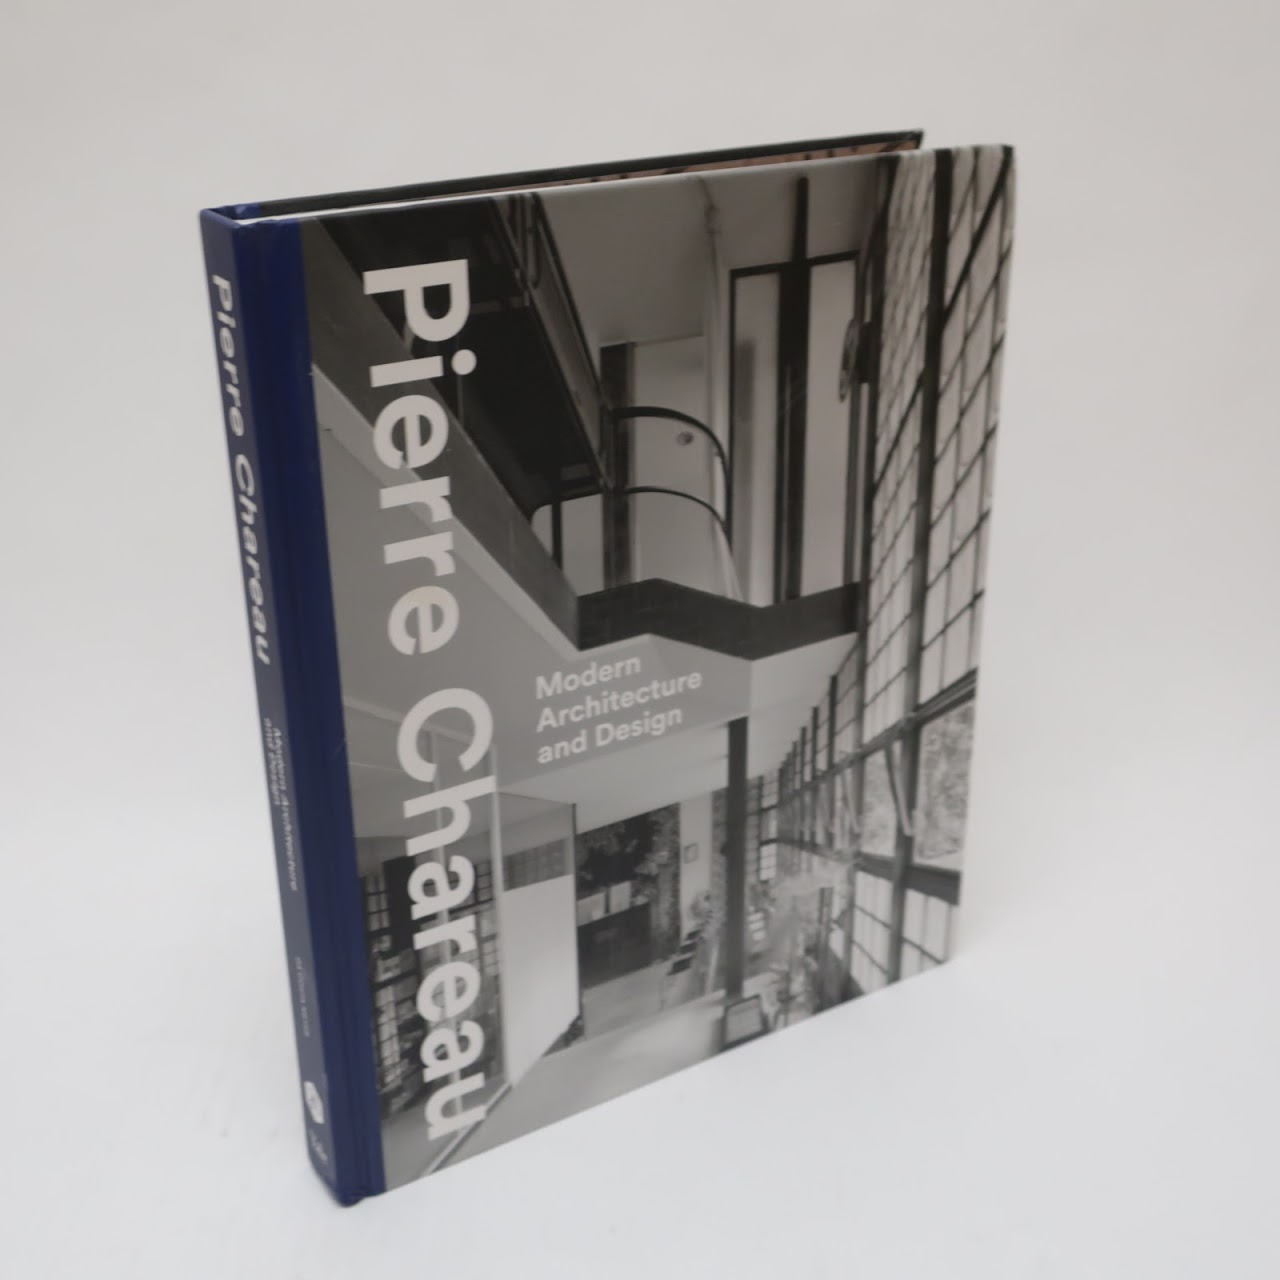 Pierre Chareau Modern Architecture and Design Book